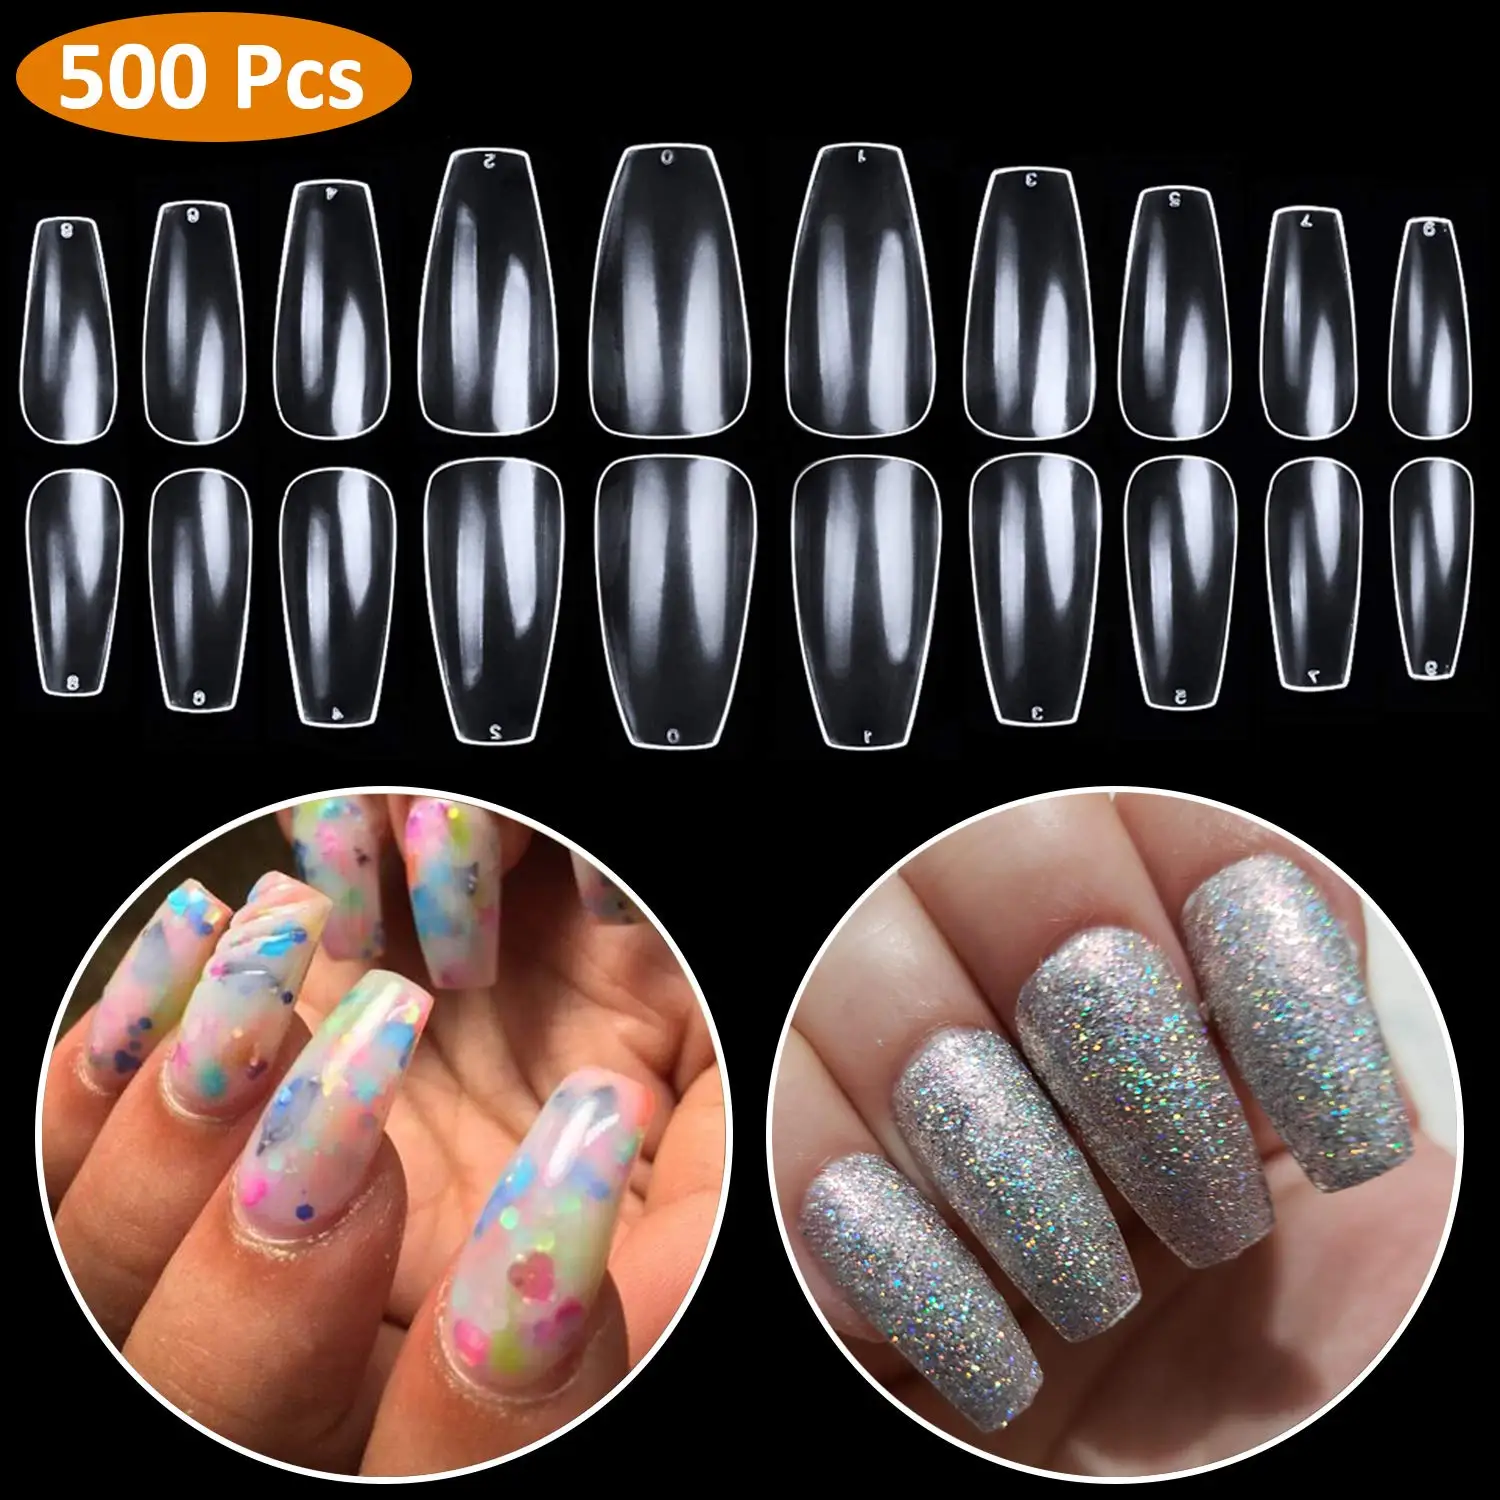 Amazon Best Sell Brand Btartbox Acrylic Nails Short Coffin Shaped Nail Tips 500 Pcs Ballerina False Nails 10 Sizes With Bag Buy Fake Nails Press On Nails Nail Tips 500pcs Product On Alibaba Com They're easy to both apply and remove. amazon best sell brand btartbox acrylic nails short coffin shaped nail tips 500 pcs ballerina false nails 10 sizes with bag buy fake nails press on